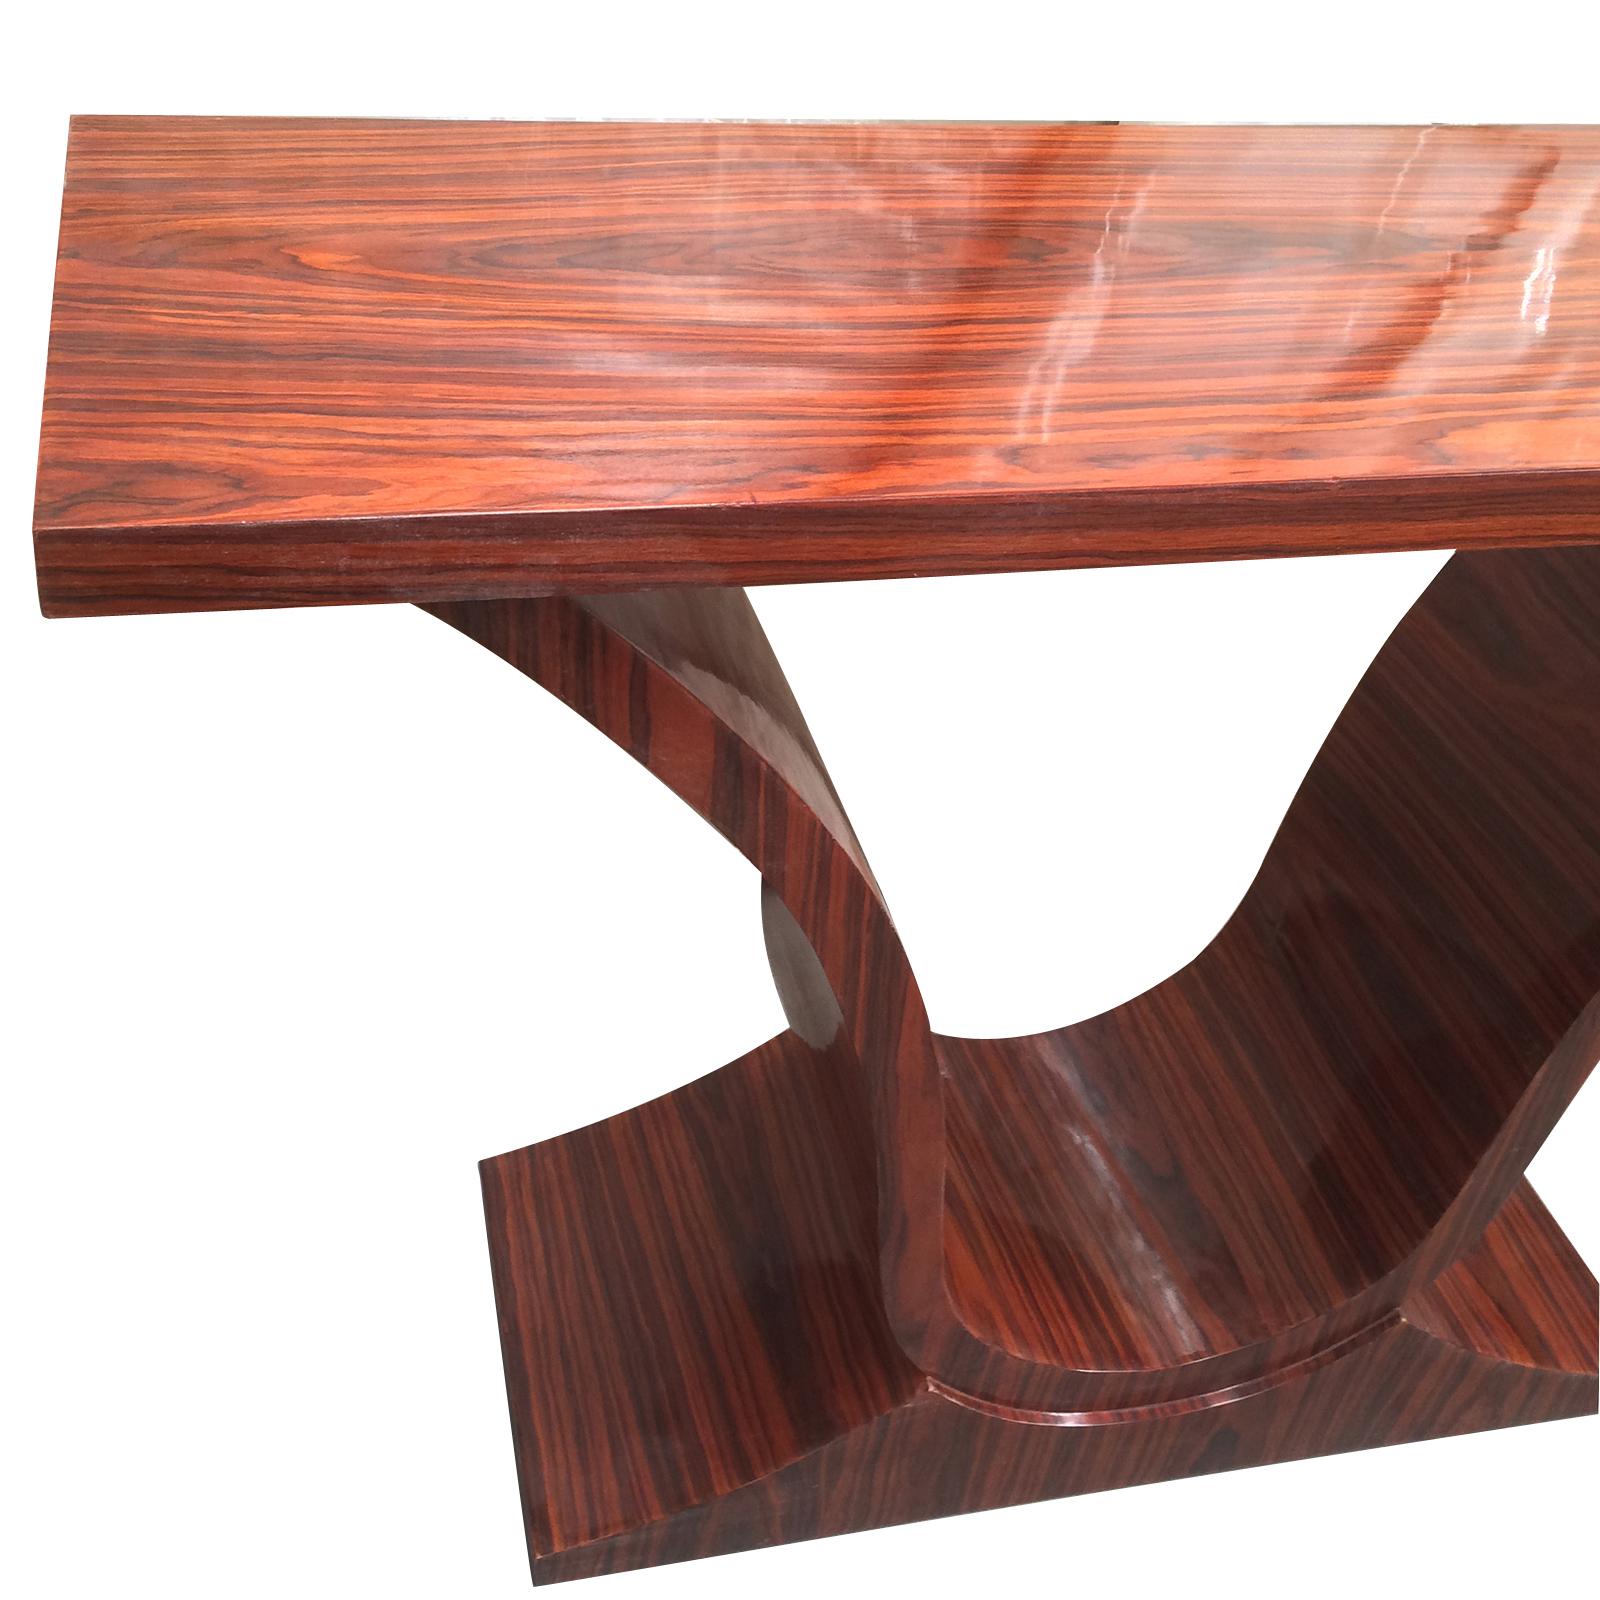 Ultra, Art Deco style console table in an Iconic shape, in Amboyna wood in glazed finish, all in excellent condition. Decorative contrast in timber, with Pillow cut, broad grain inverted “U” over centre of lower area of the curved legs. Splayed feet